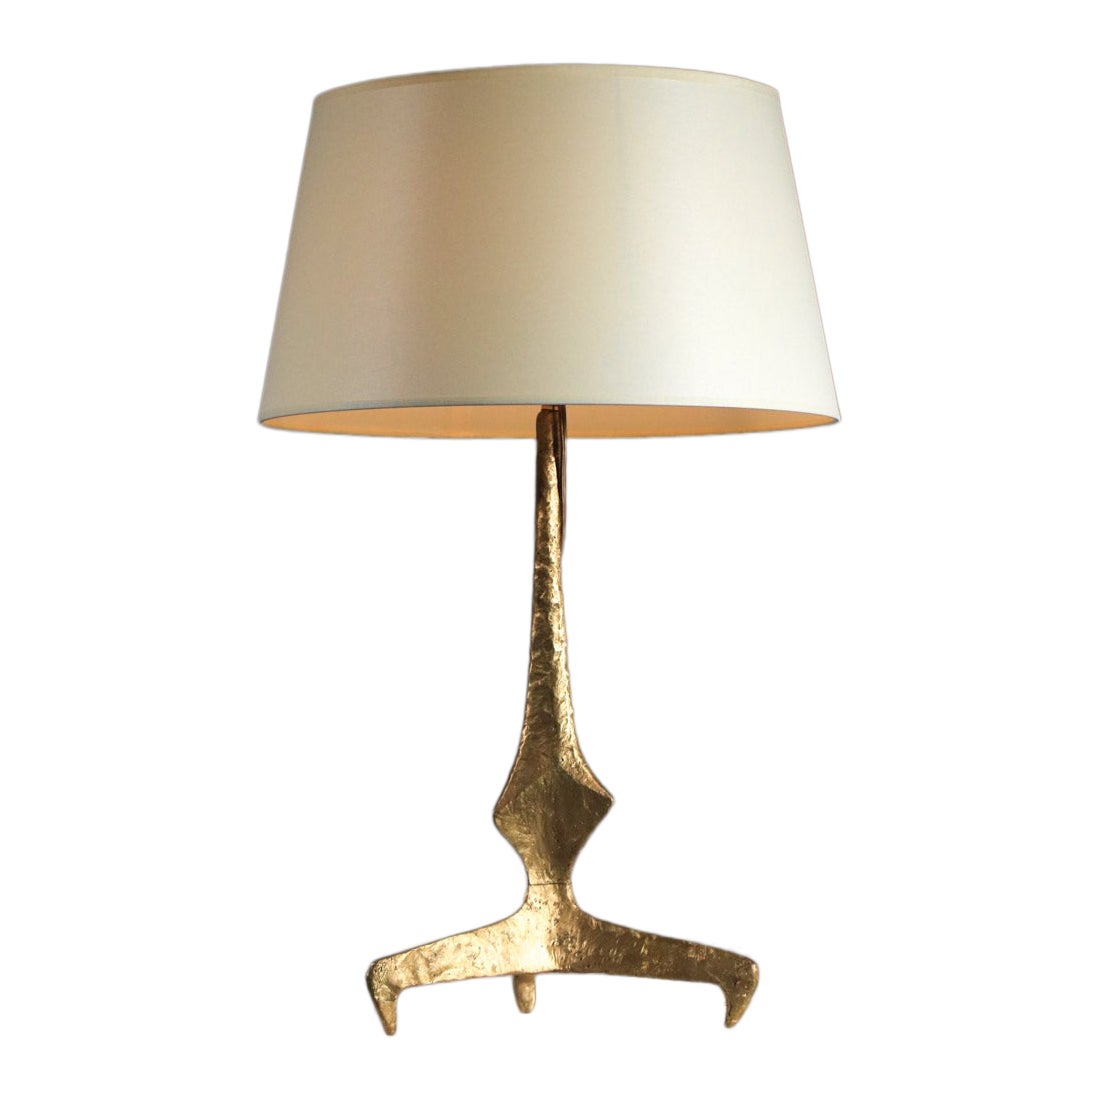 Gilt bronze table lamp in the Felix Agostini style, tripod-shaped 